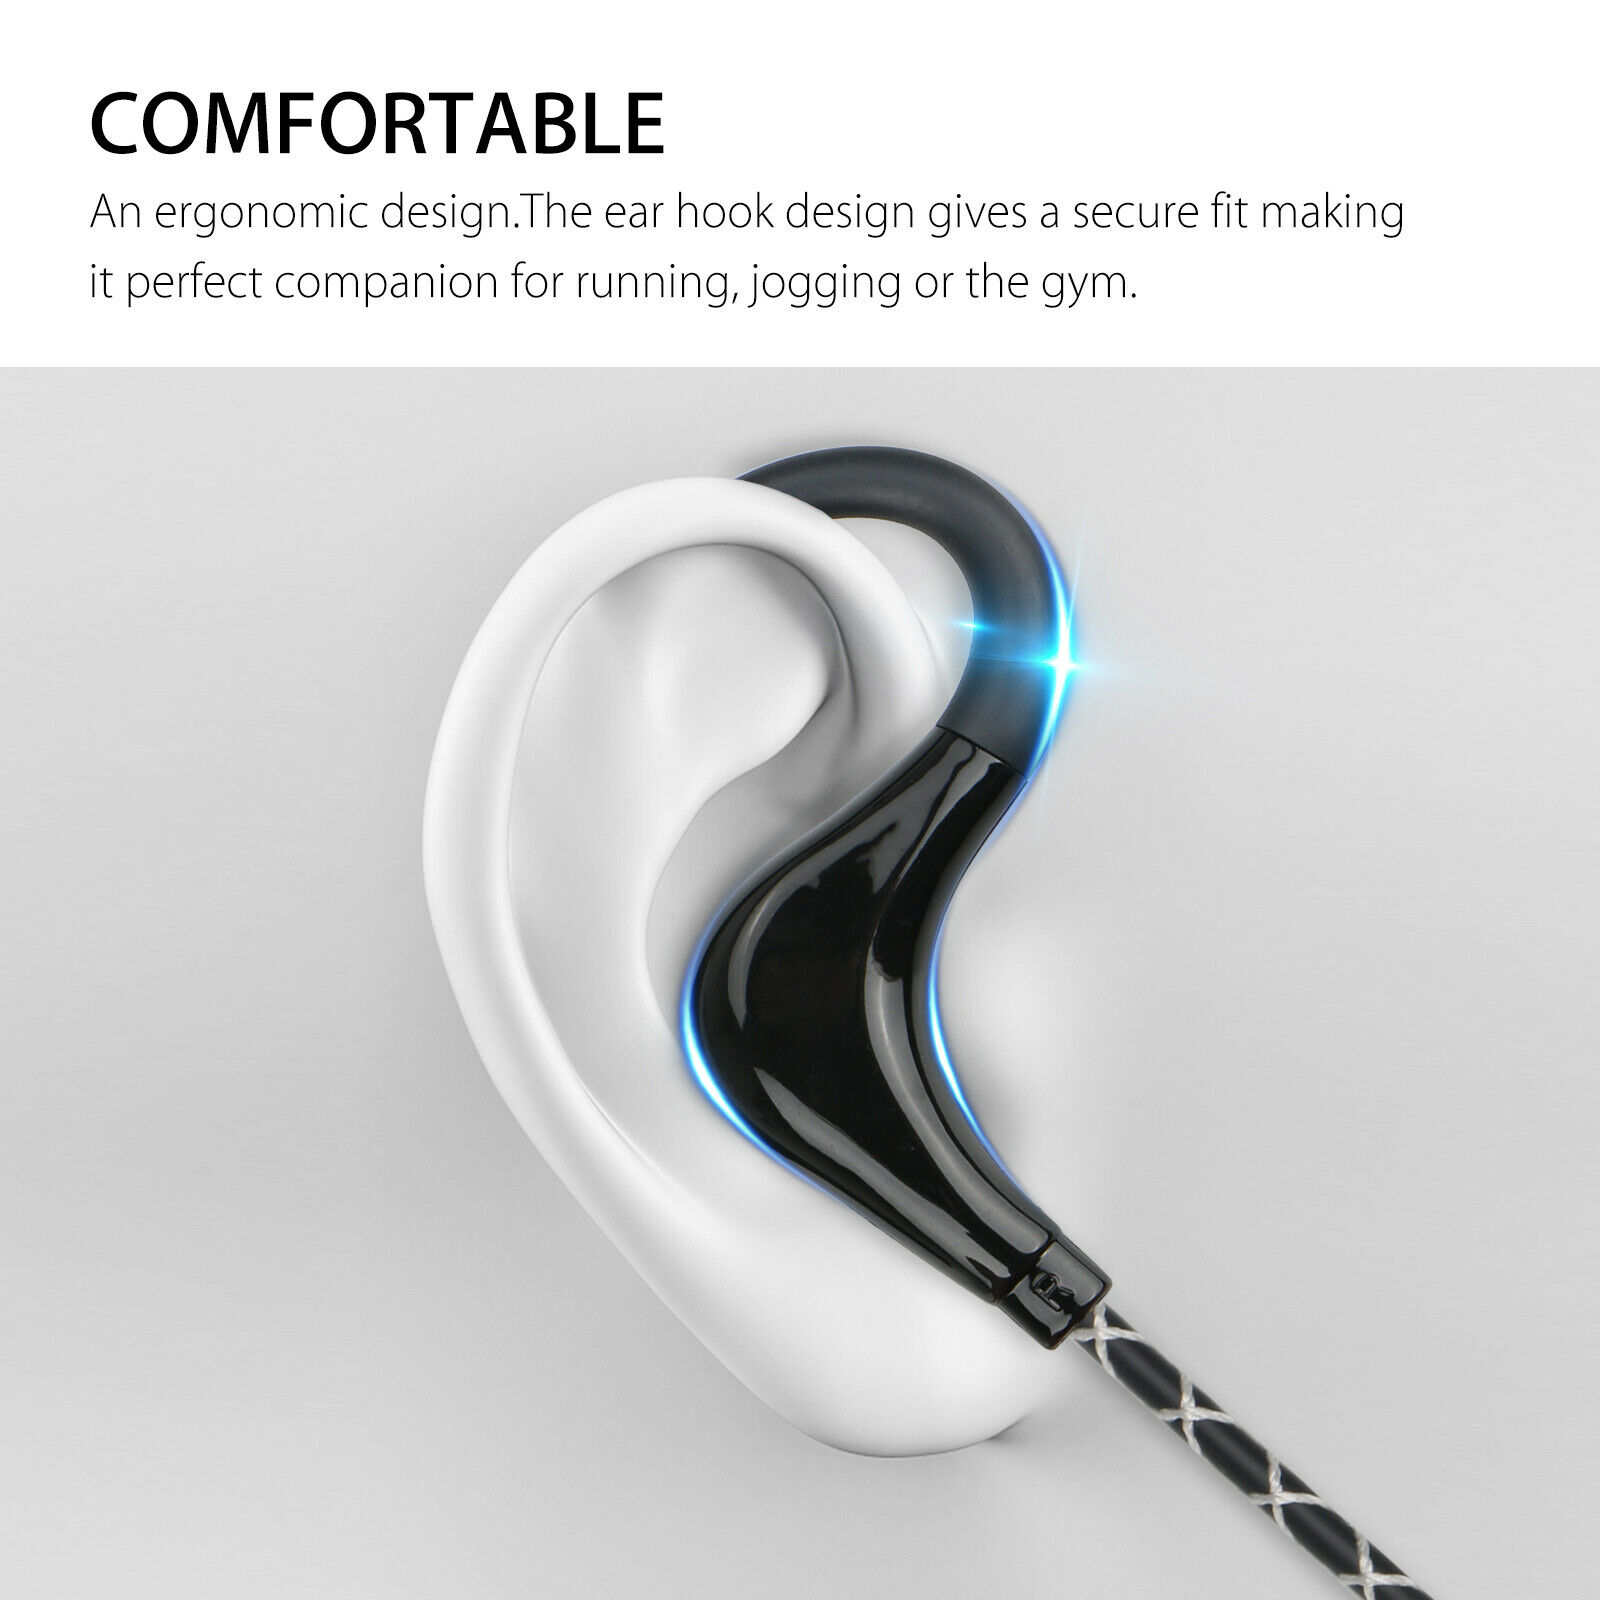 Wired Earbuds, Earbuds with Microphone and Volume Control, in Ear Ergonomic Noise Isolating Headphones, Earphones with 3.5mm Jack,Powerful Bass Sound - image 4 of 8